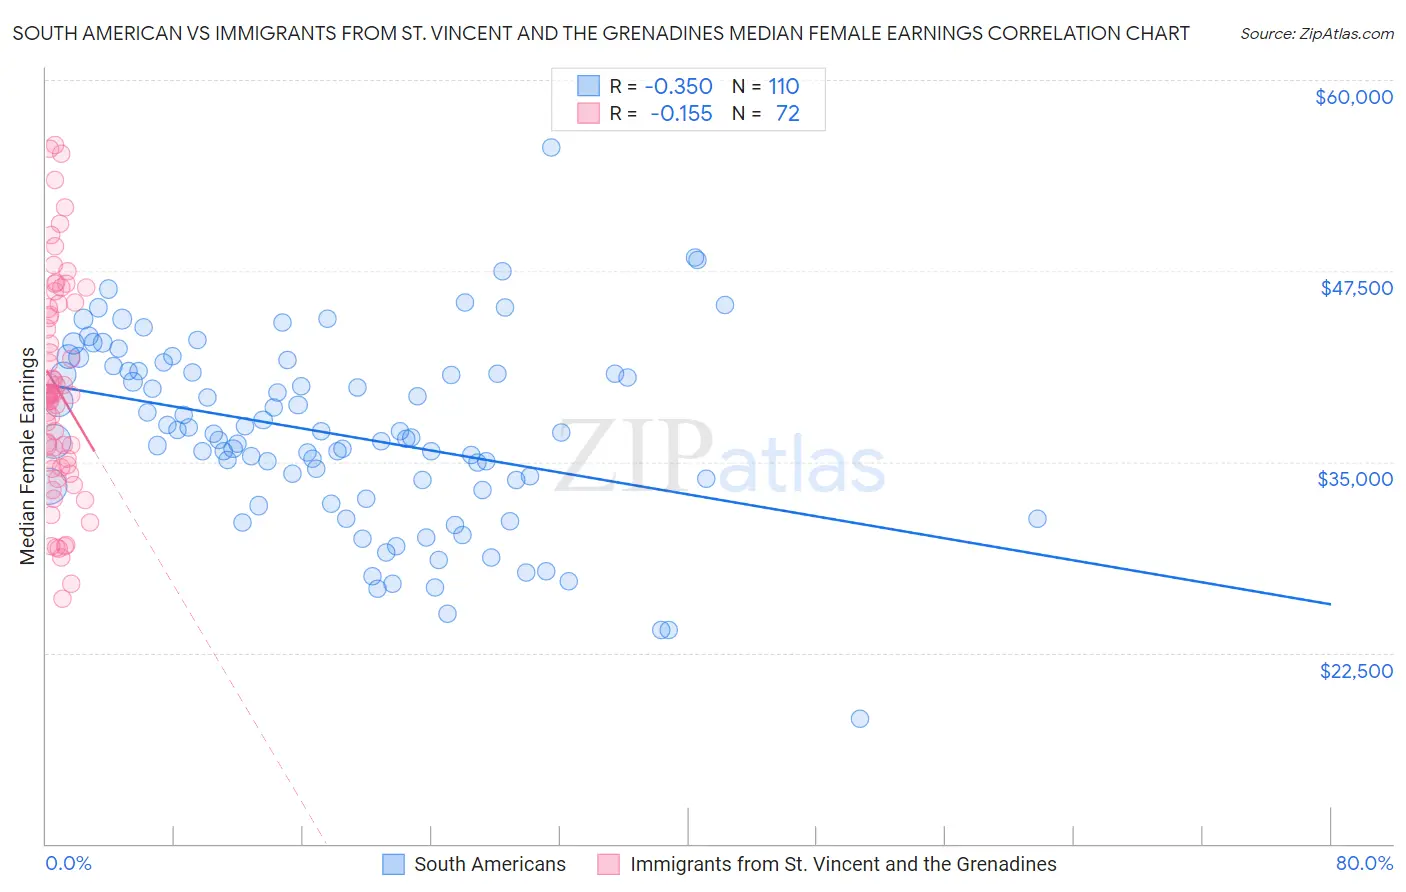 South American vs Immigrants from St. Vincent and the Grenadines Median Female Earnings